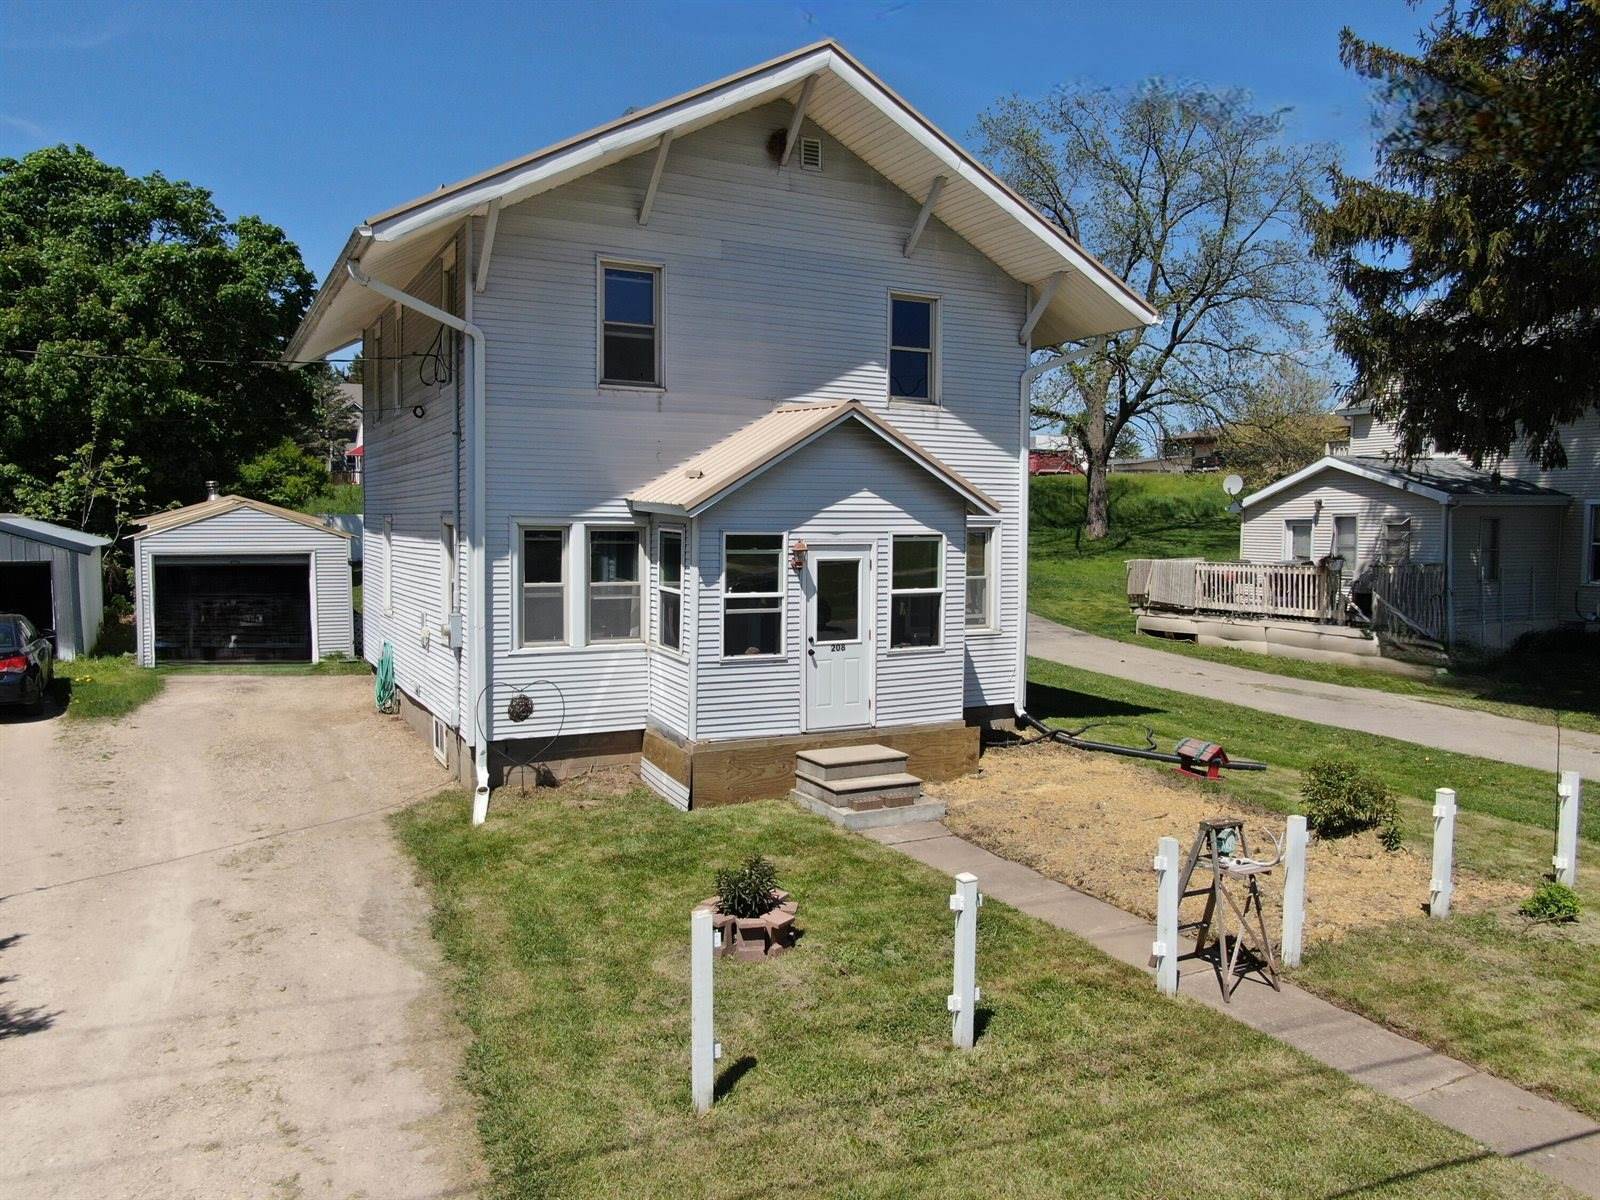 208 Black River Ave, Westby, WI 54667